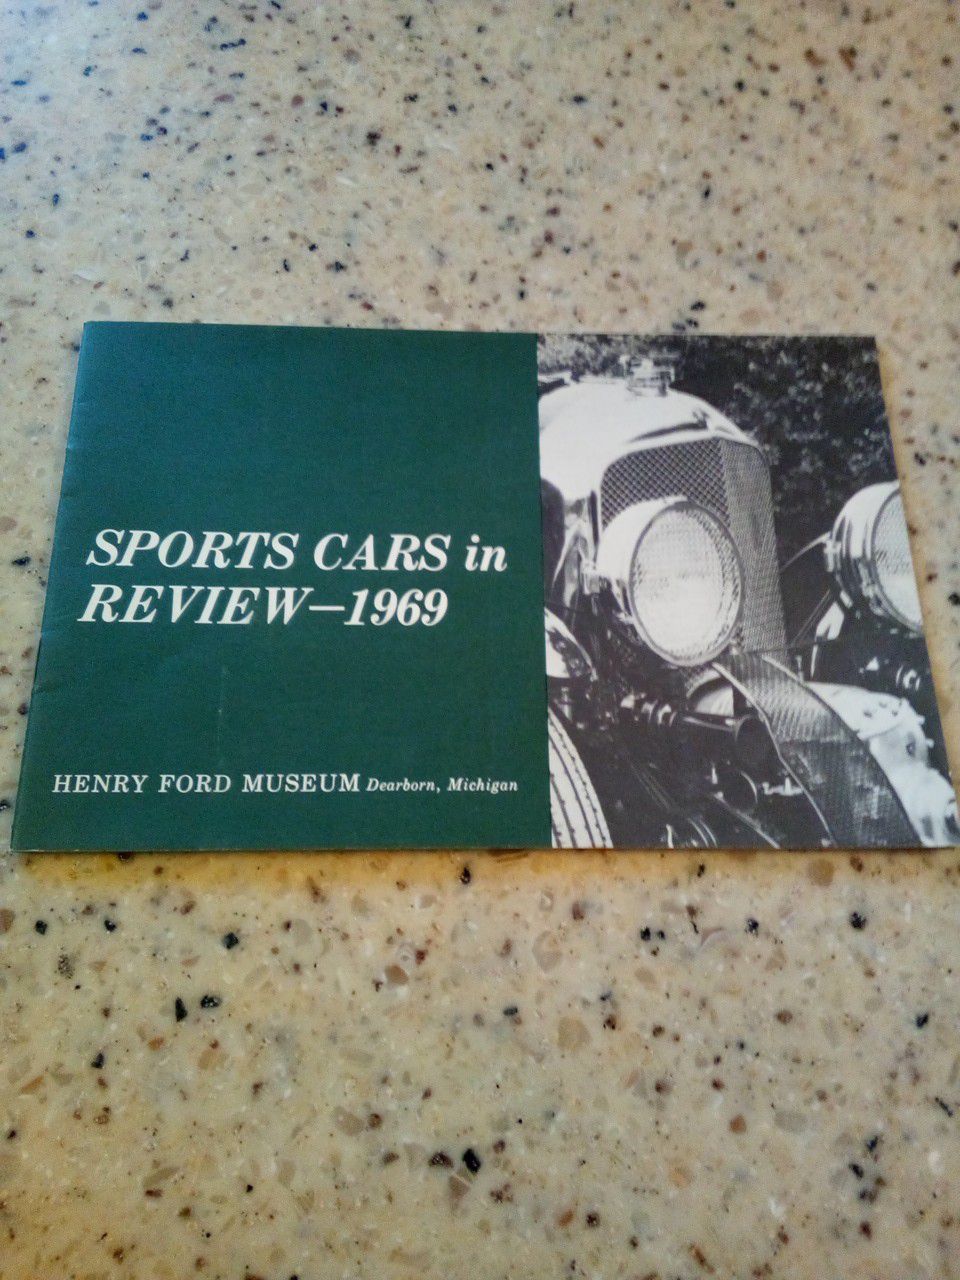 Vintage sports cars in review-1969 brochure/ Henry ford museum Dearborn, Michigan/ theater activities guide